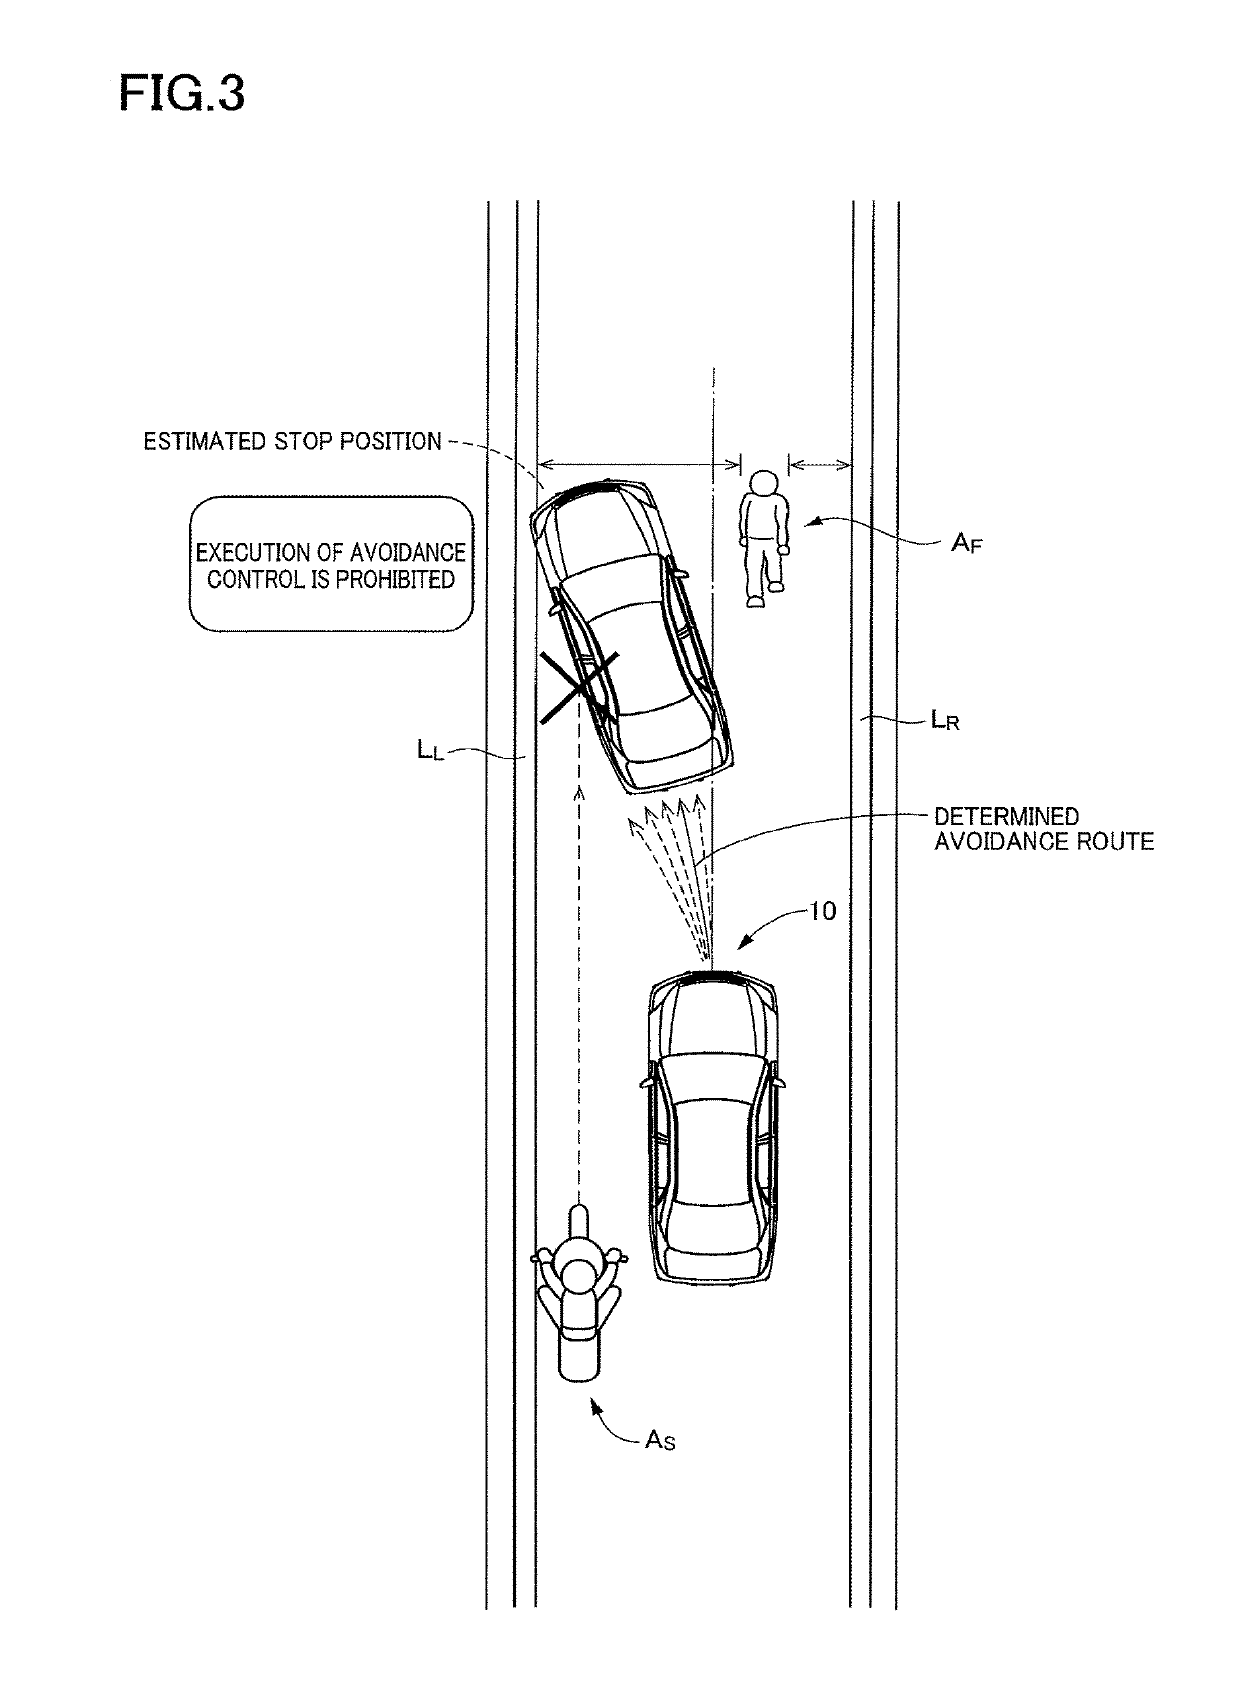 Vehicle collision avoidance assist system